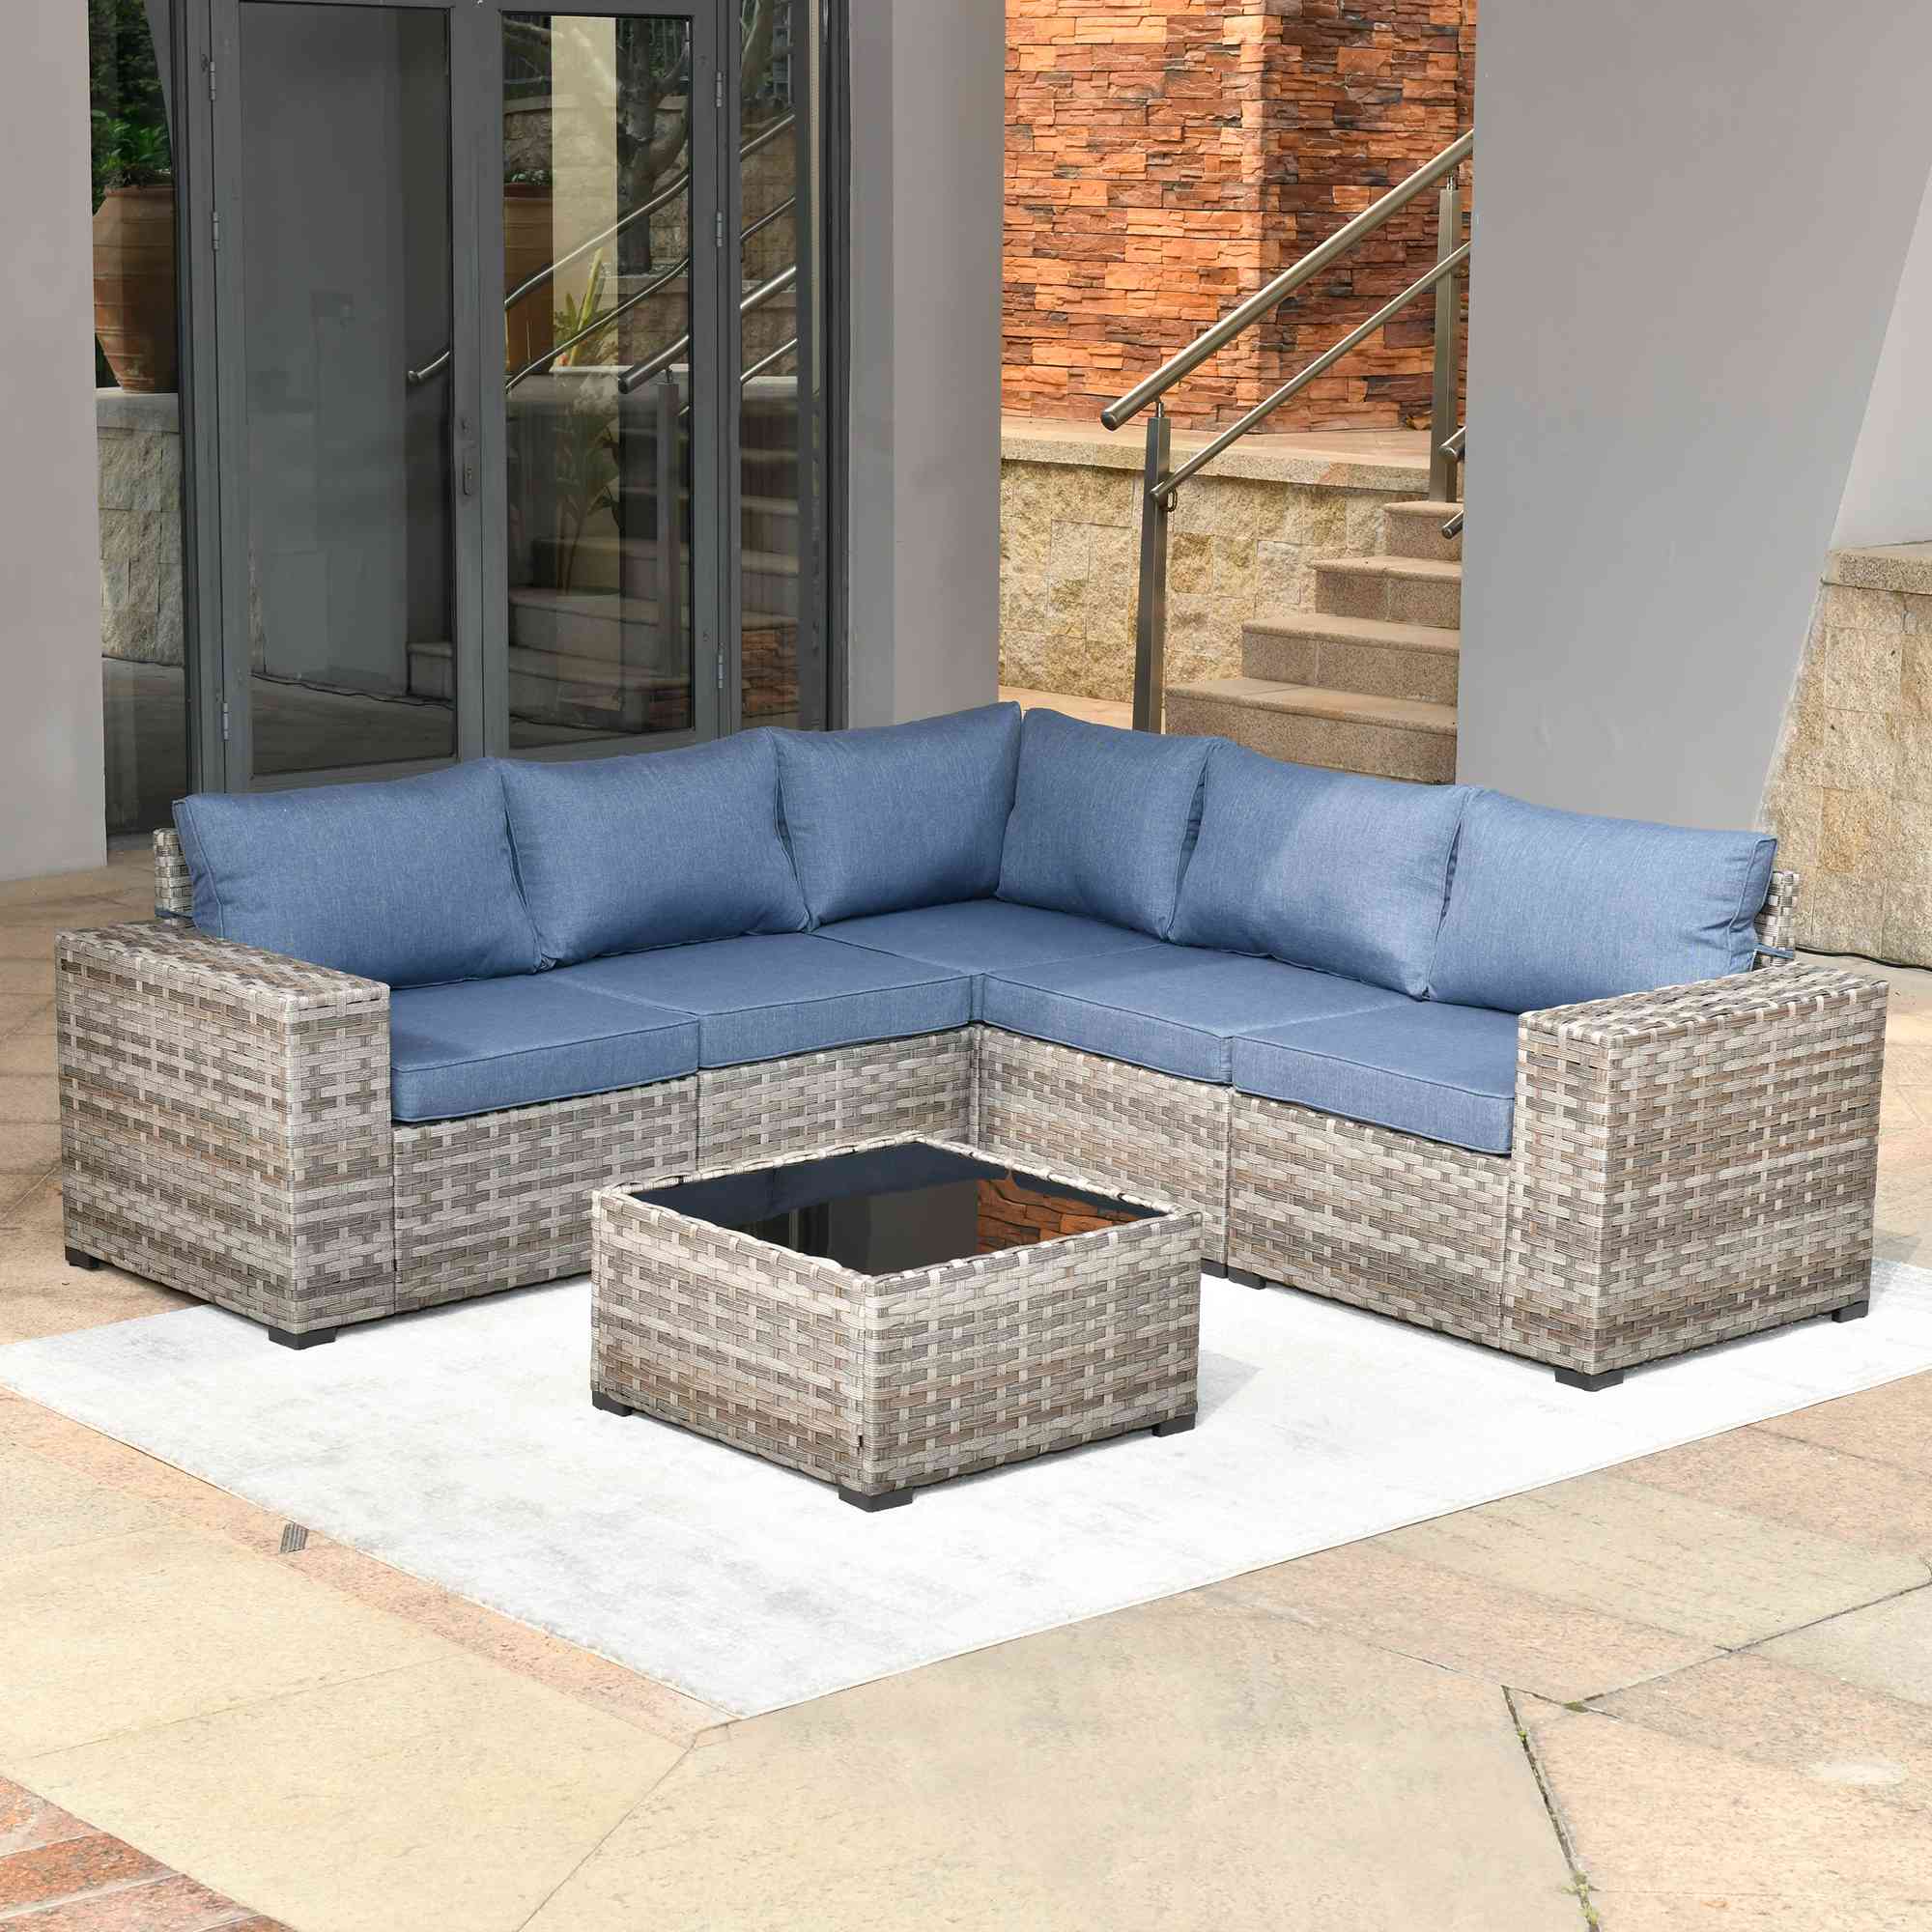 Ovios 6 Pieces Outdoor Sectional Sofa with 7.68'' Broad Handrails